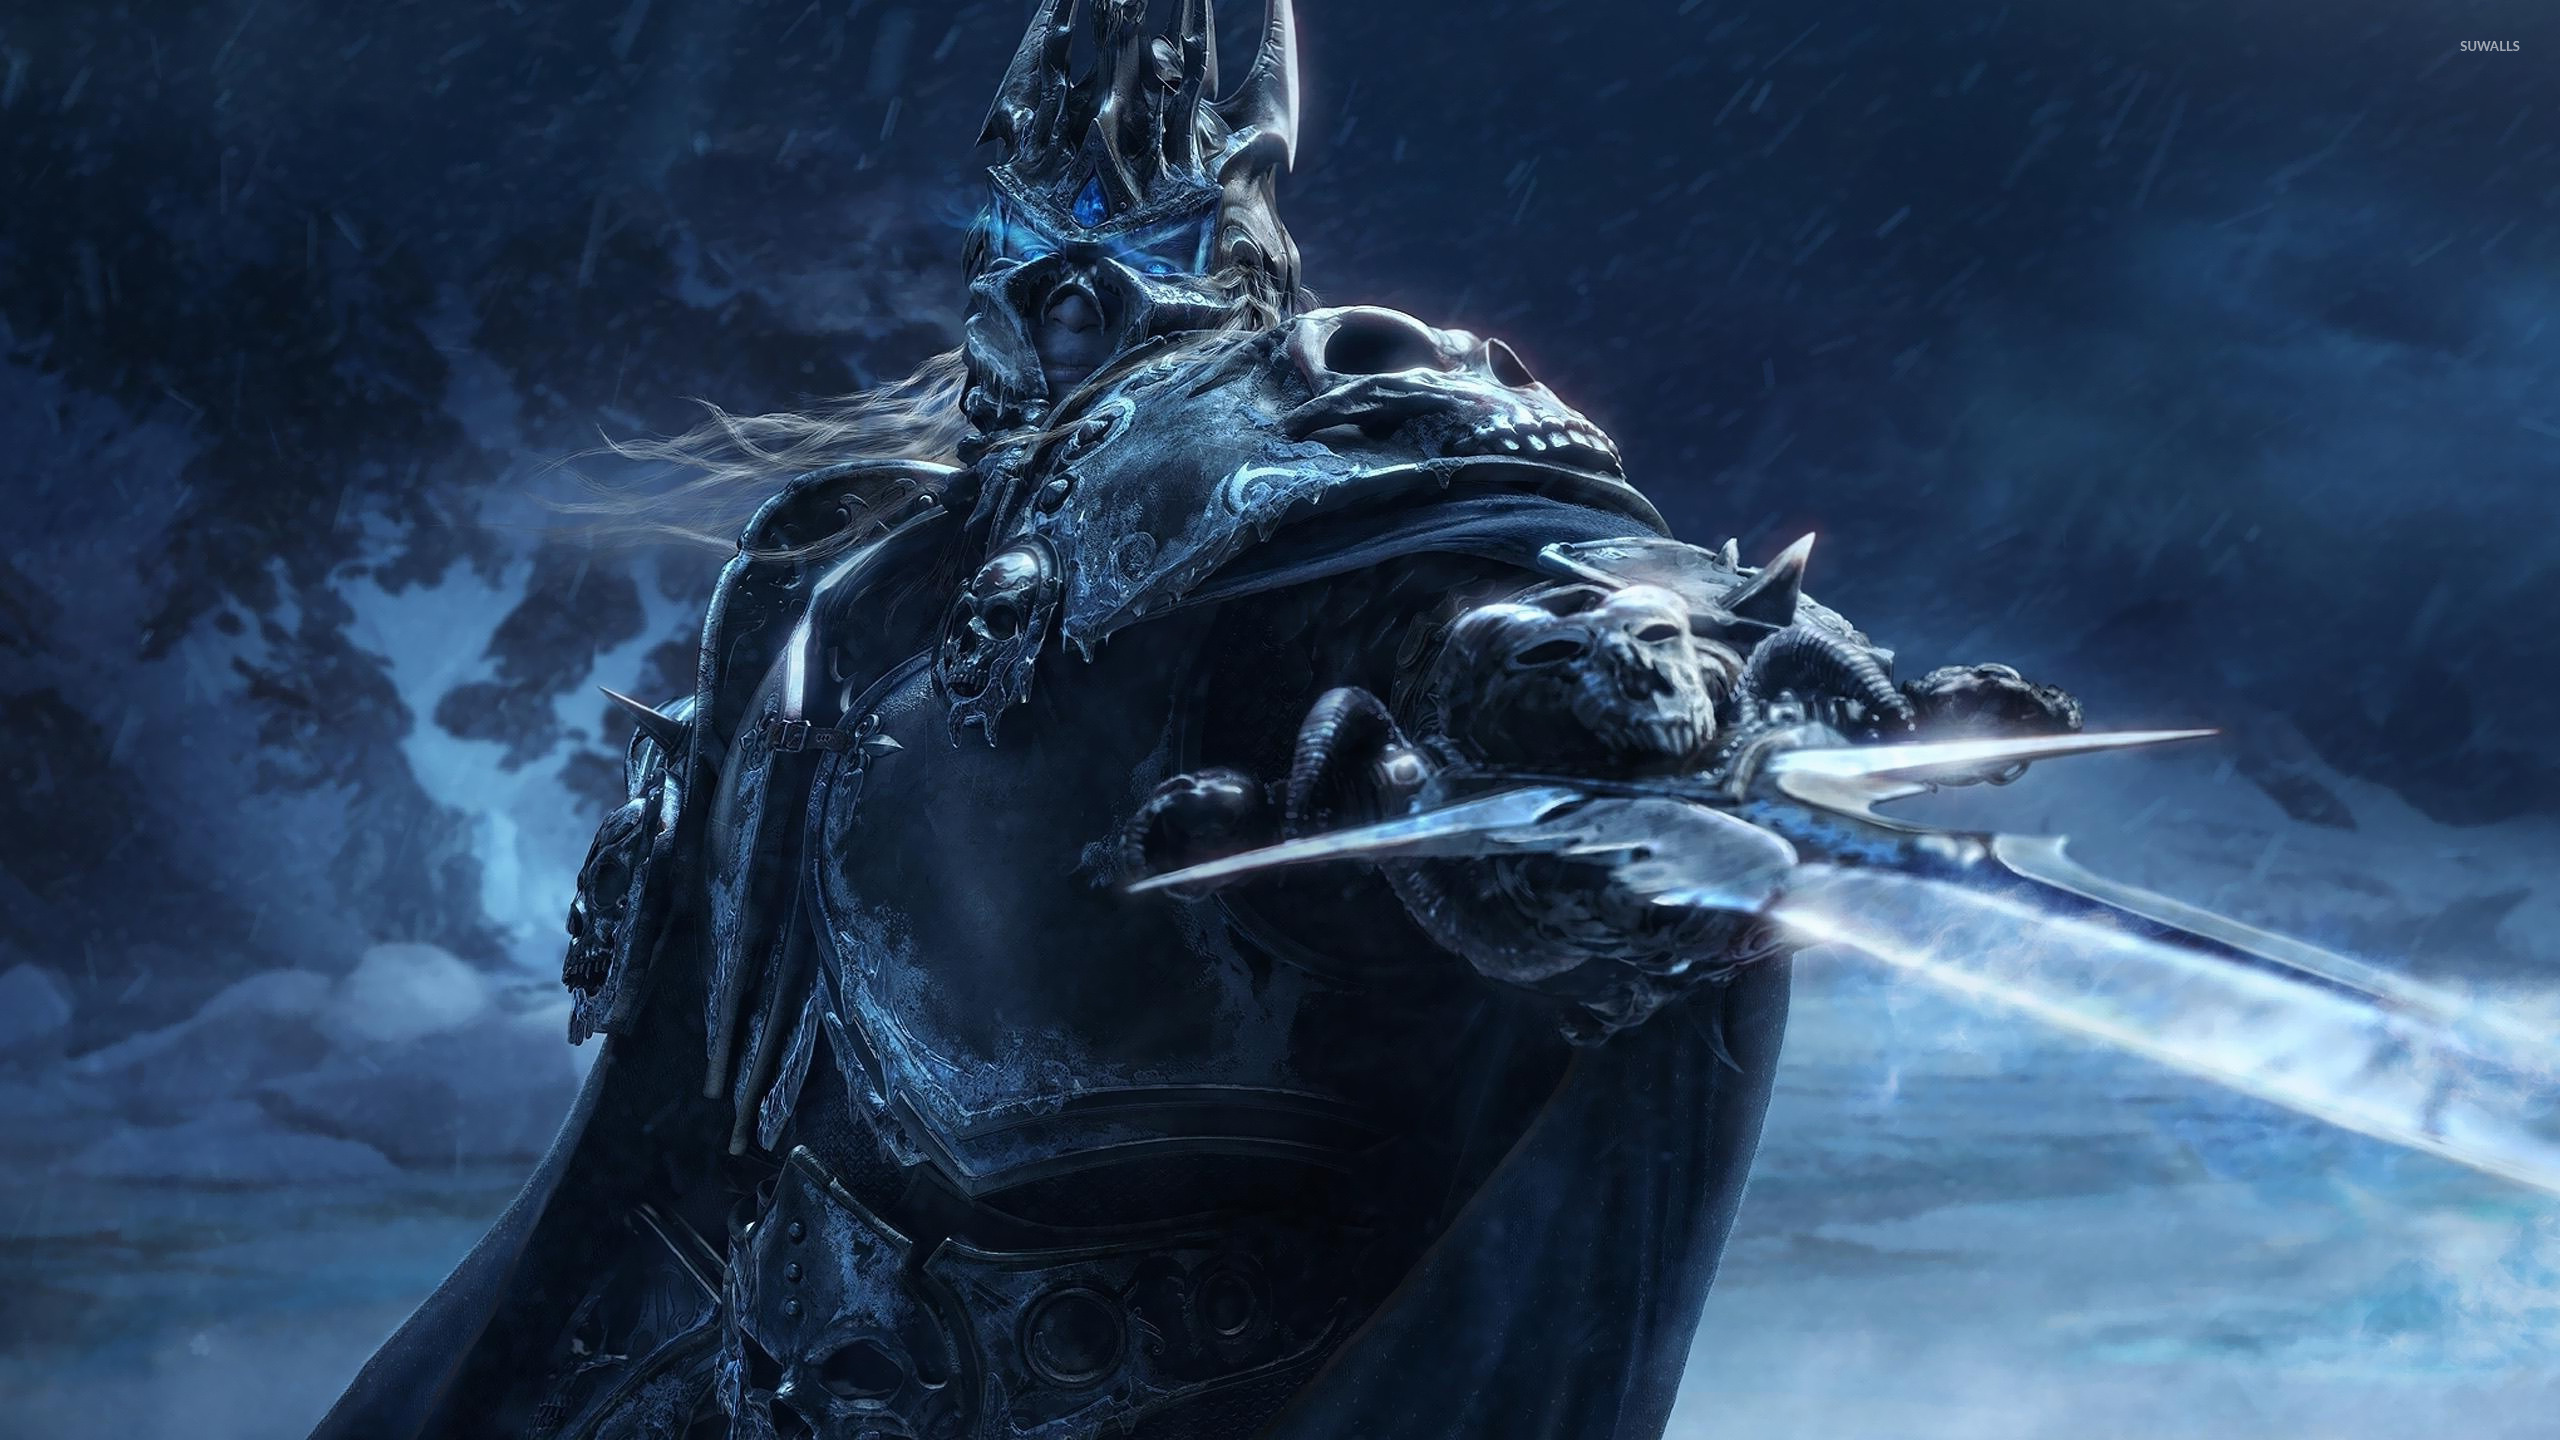 World of Warcraft Wrath of the Lich King wallpaper   Game wallpapers